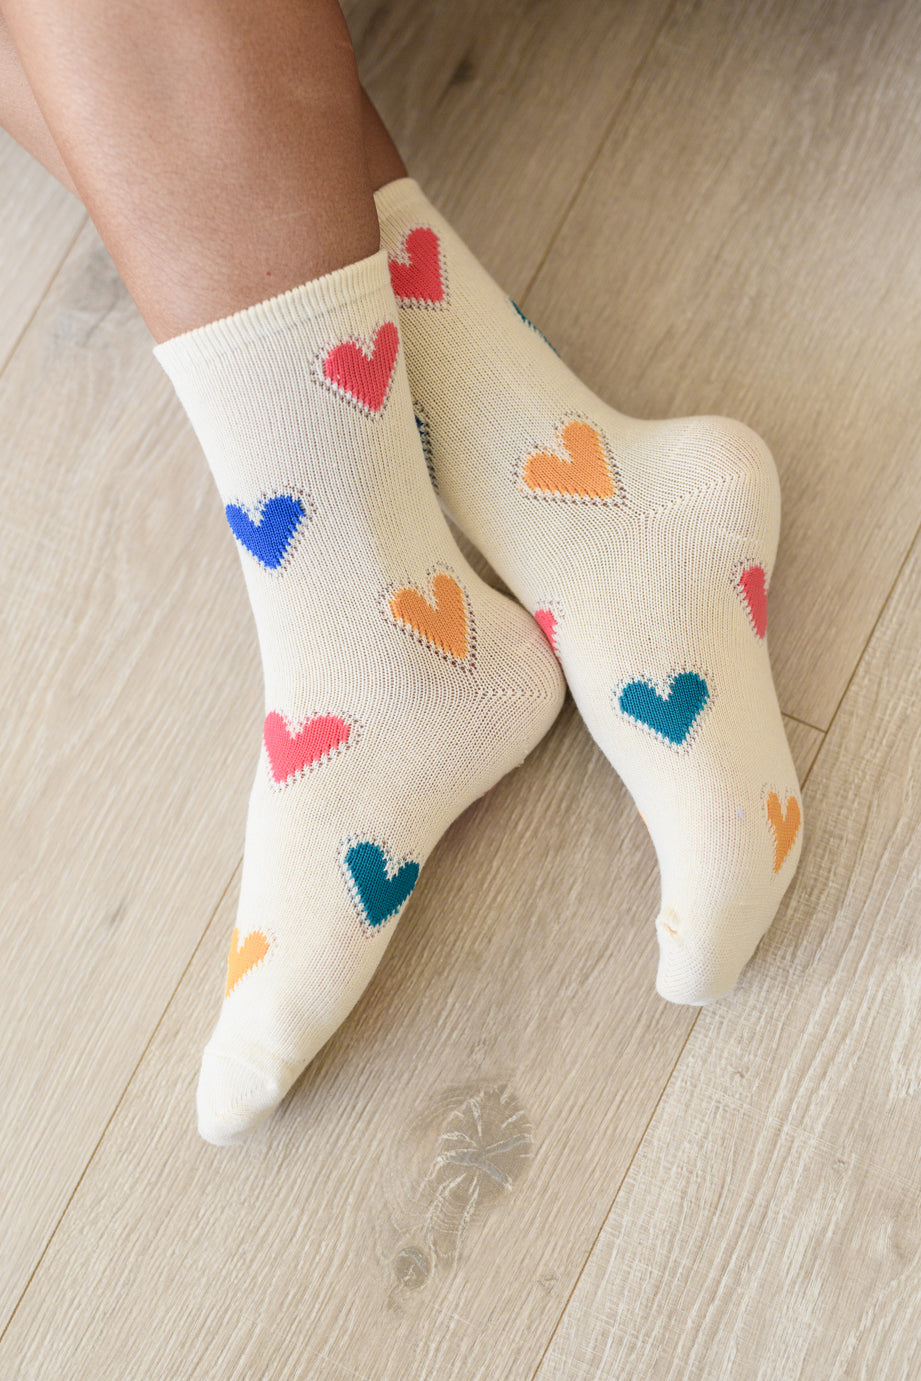 Woven Hearts Everyday Socks Set of 3-Womens-OS-AllyKat Boutique Shop for Women & Kids